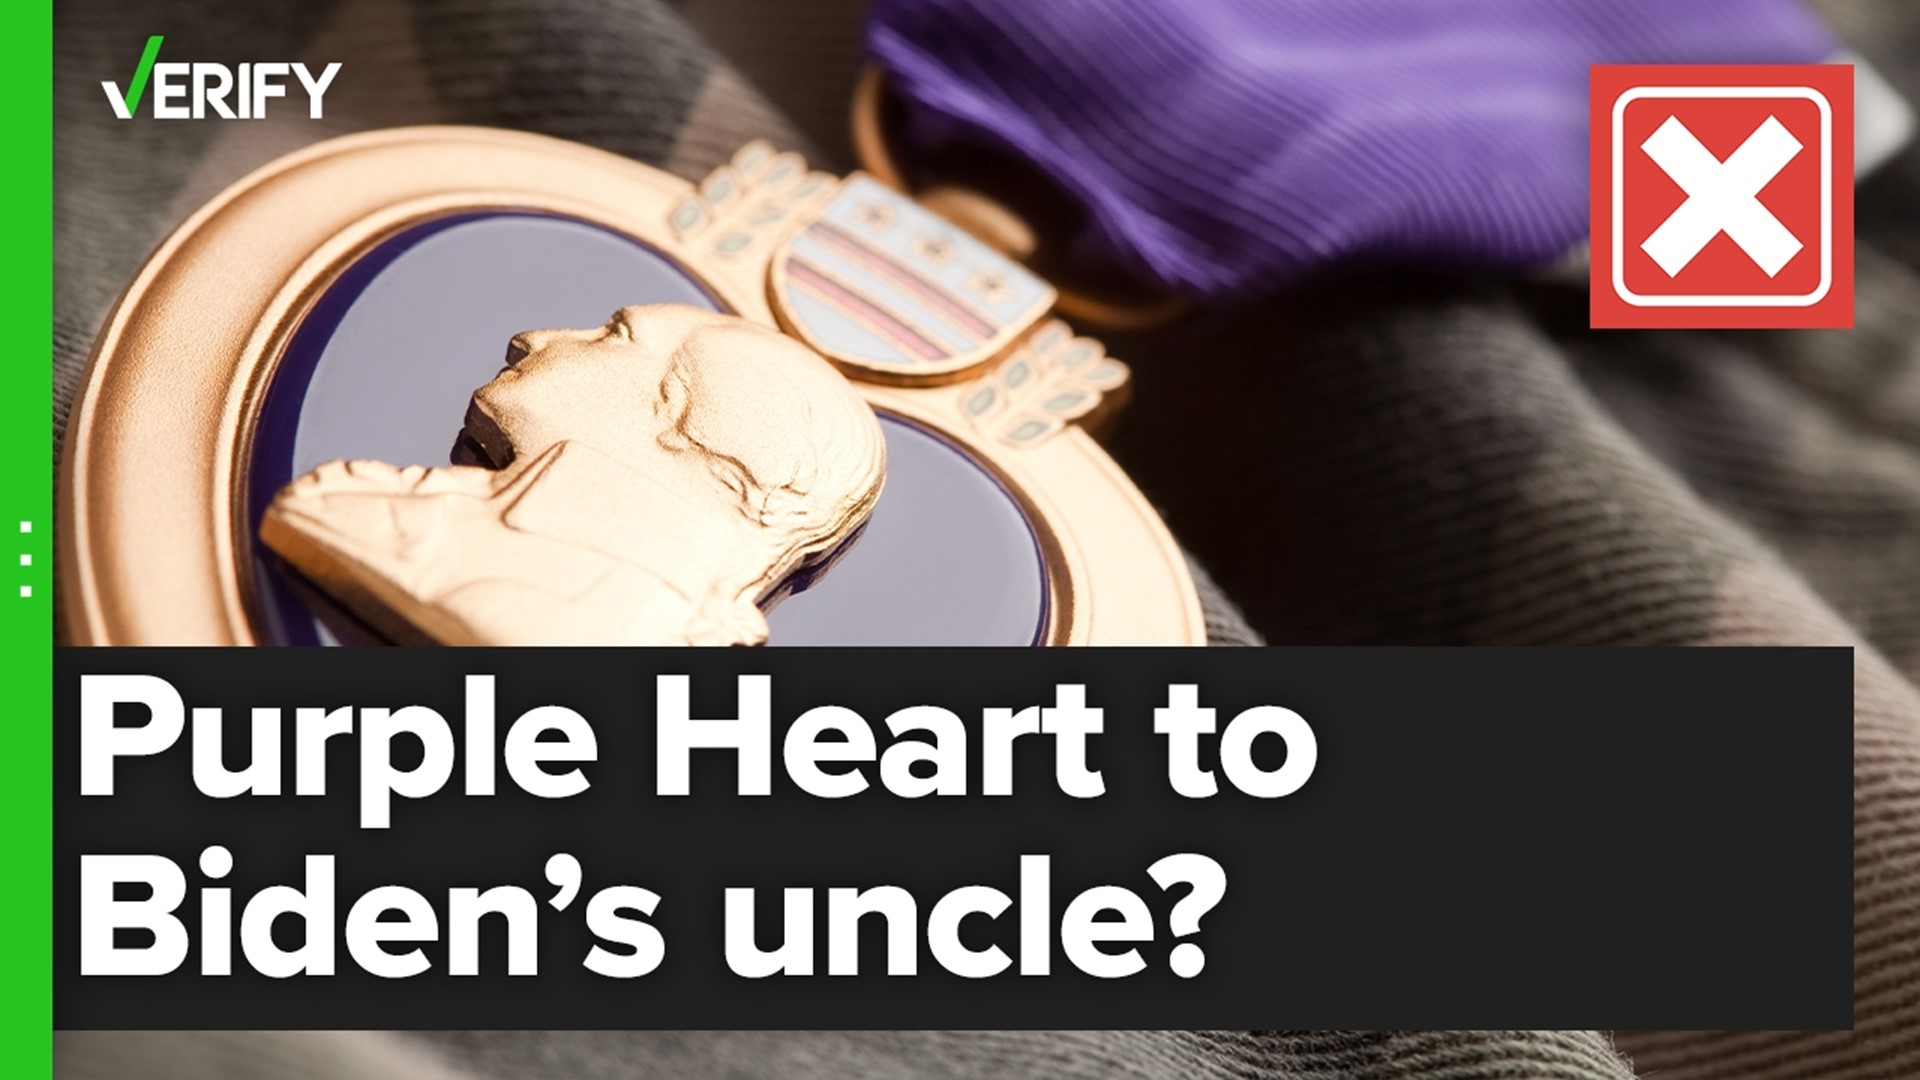 President Joe Biden said he awarded his uncle, Frank Biden, a Purple Heart for his military service. But there are several inaccuracies in his story.